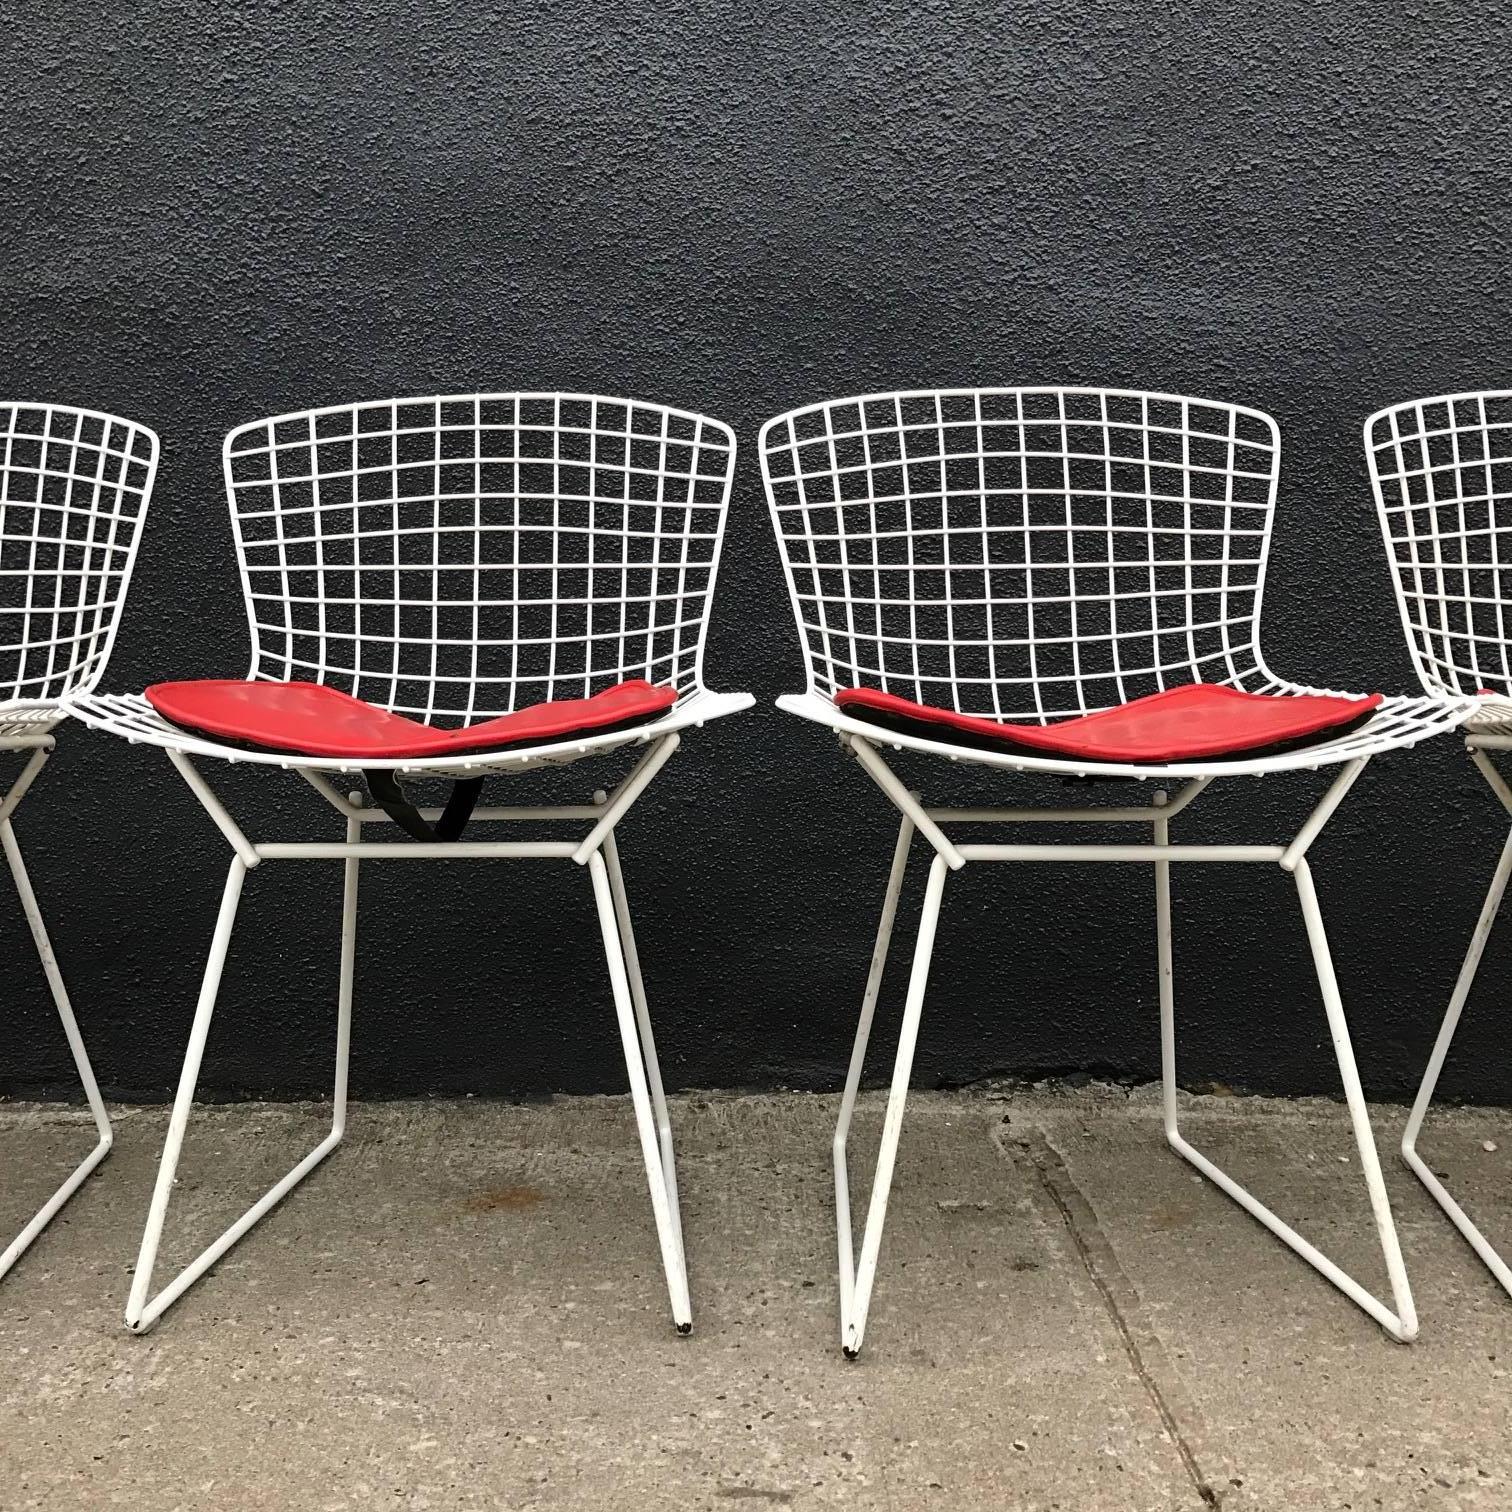 American Mid-Century Knoll Bertoia Wire Chairs in White with Red Seat Pads